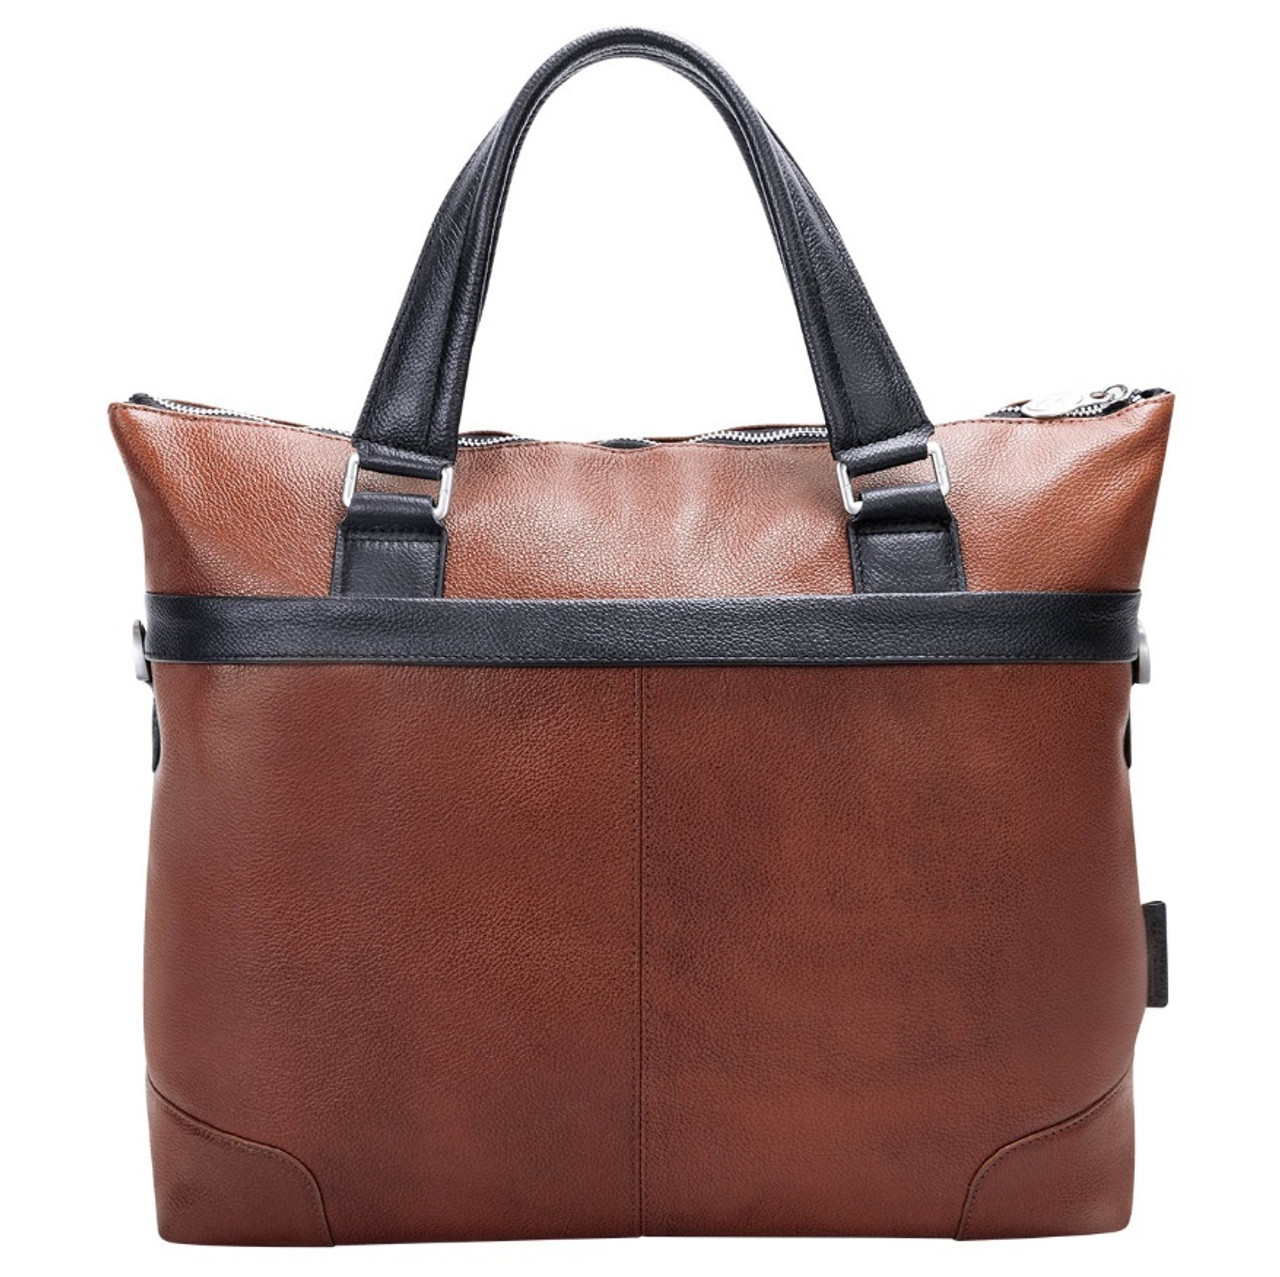 Franklin Covey Leather Computer Tote Bag / Laptop Case - Brown